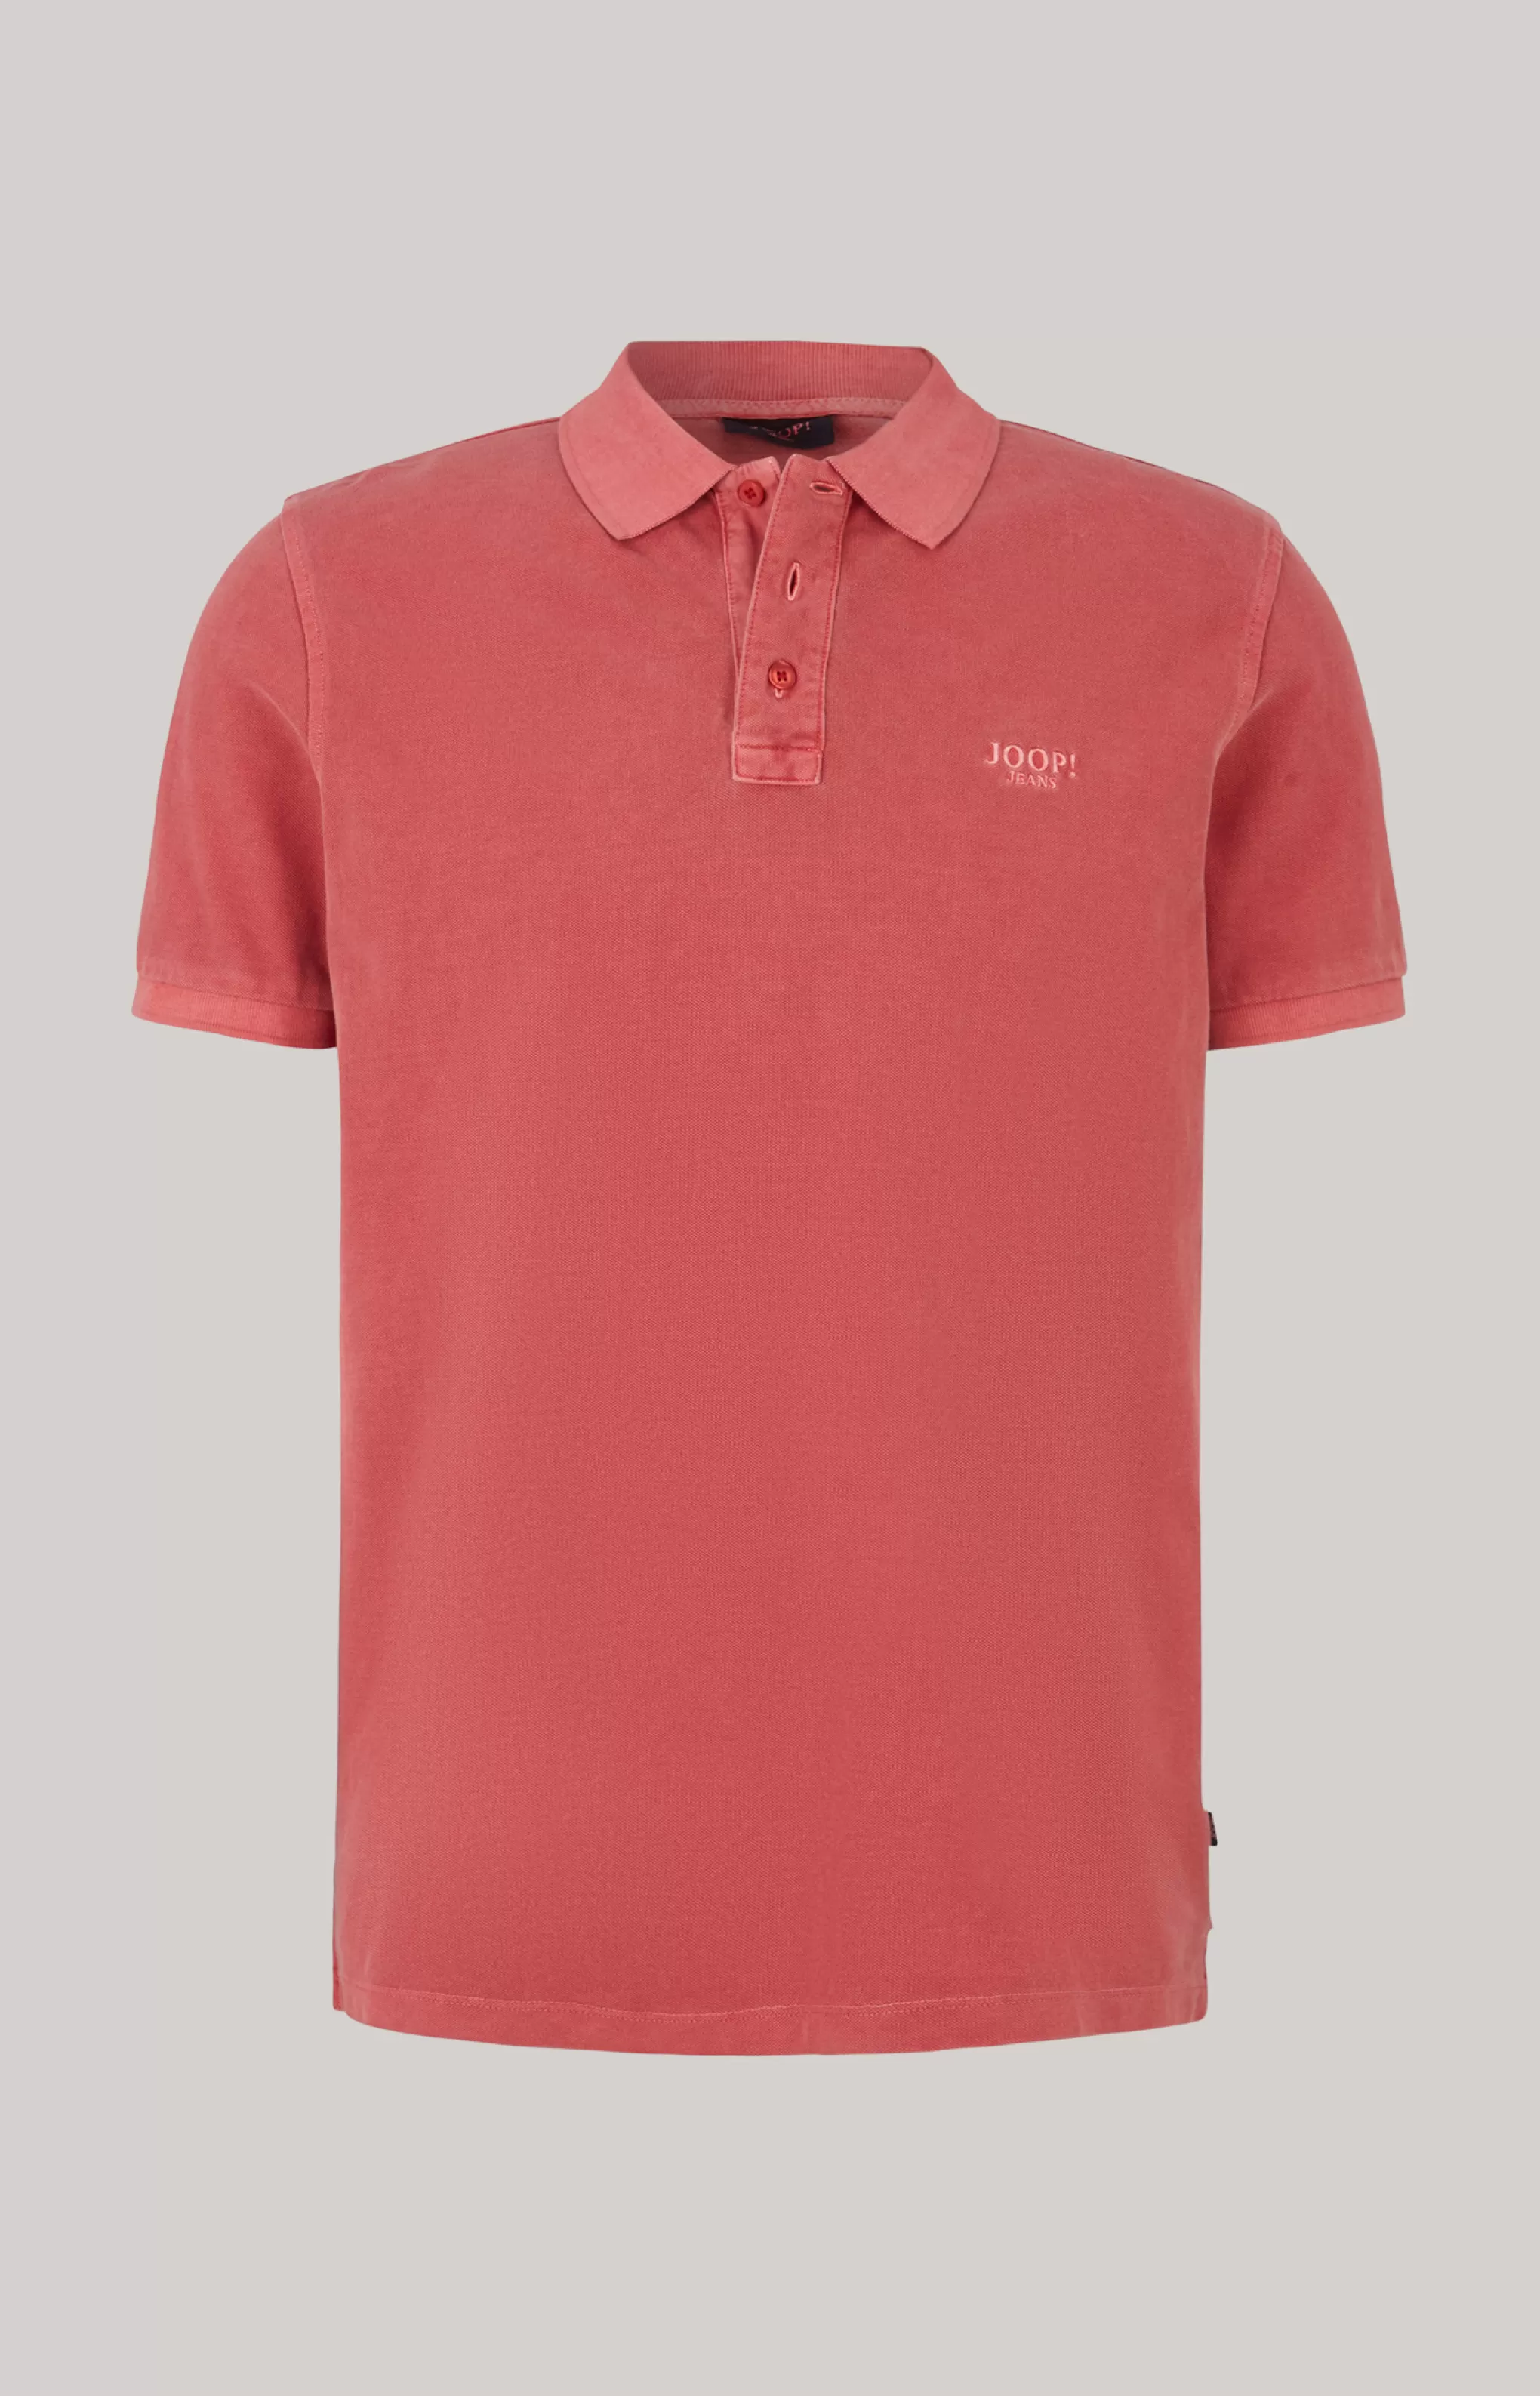 Polo Shirts | T-shirts*JOOP Polo Shirts | T-shirts Ambrosio Polo Shirt in